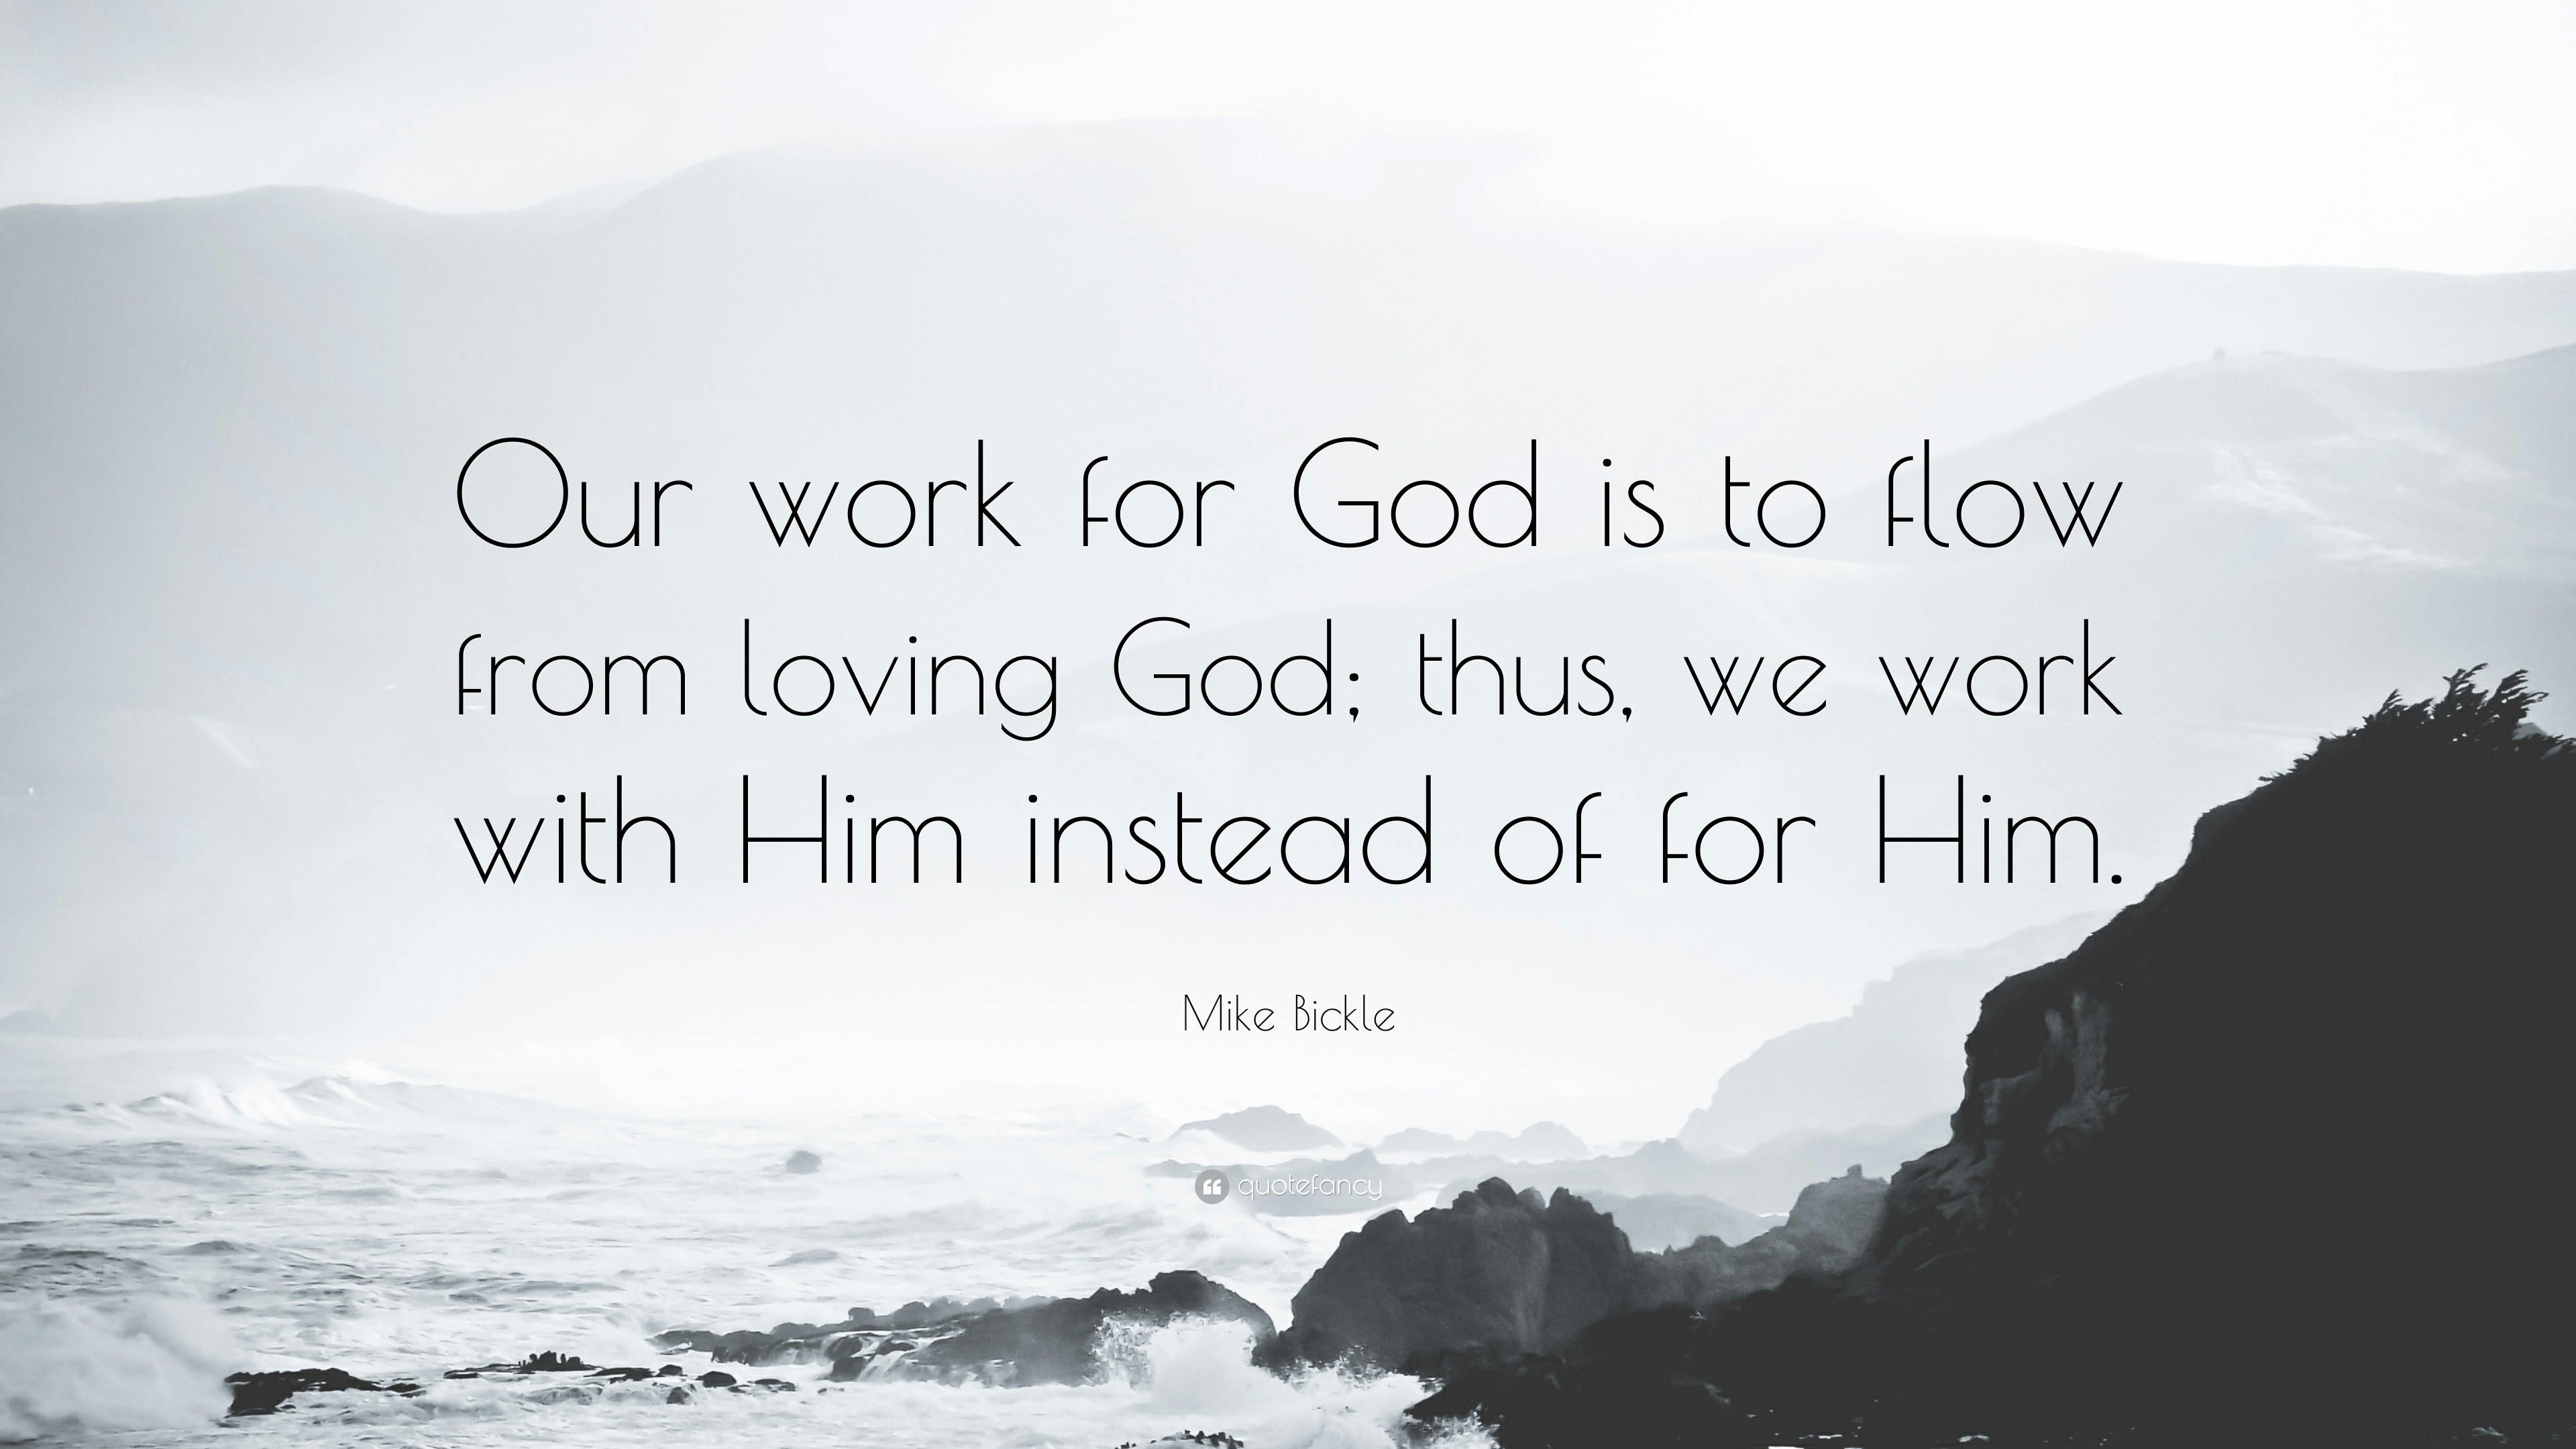 Mike Bickle Quote “Our work for God is to flow from loving God